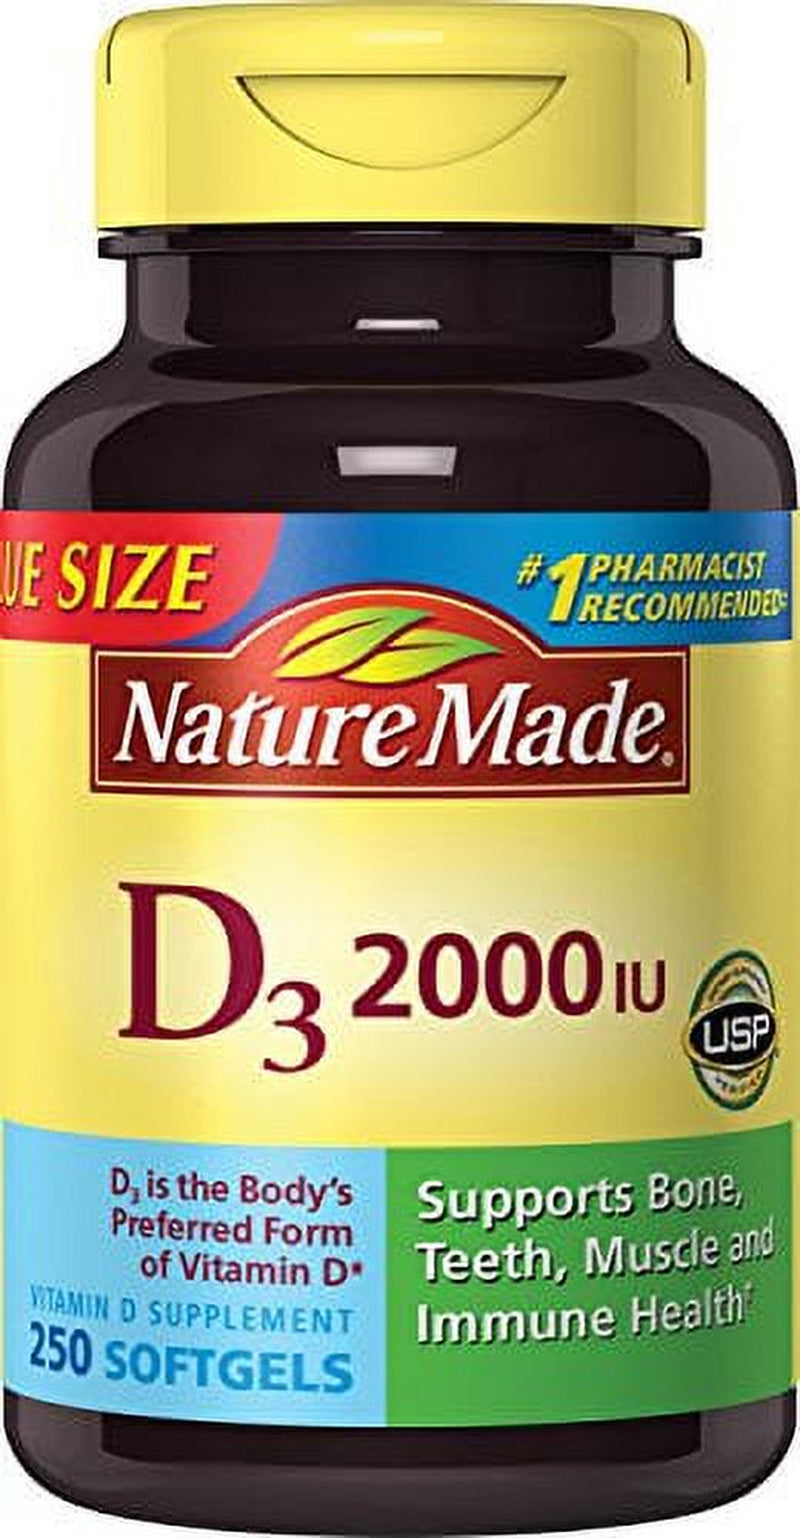 Nature Made Vitamin D3 2000 IU (50 Mcg) Softgels, 250 Count Everyday Value Size for Bone Health? (Packaging May Vary)